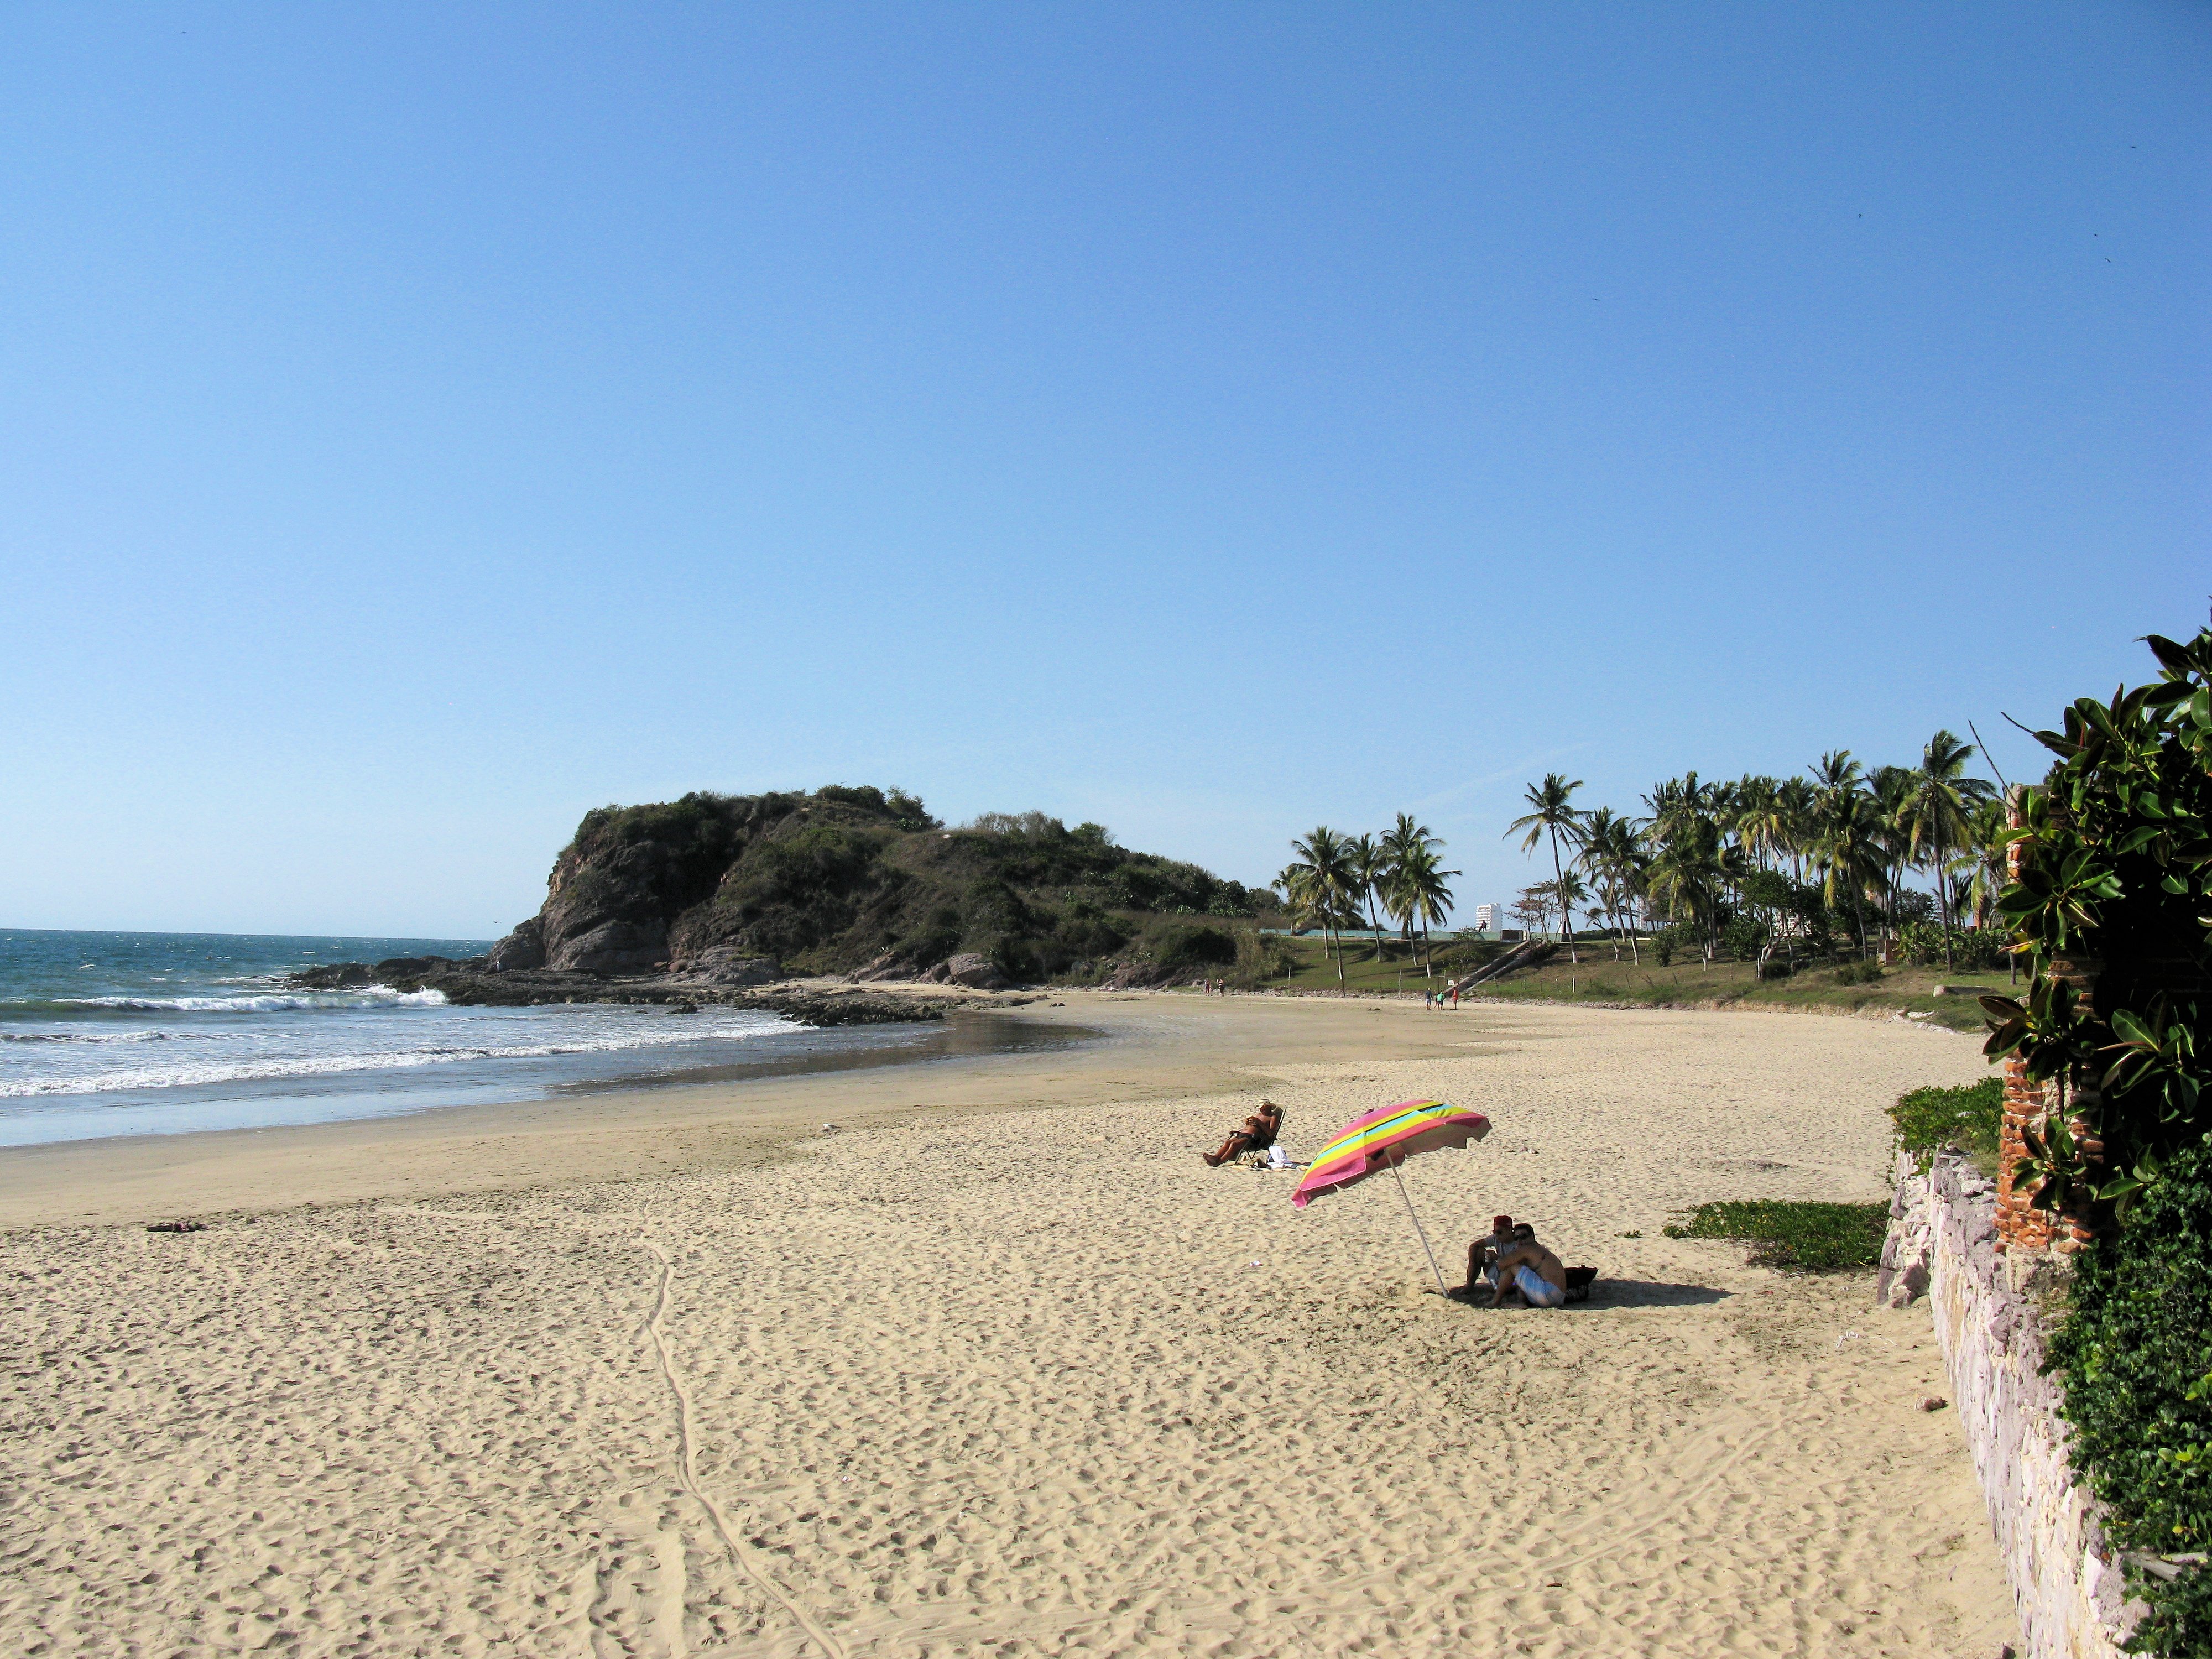 Even within the city, Mazatlán has its quiet, secluded beaches